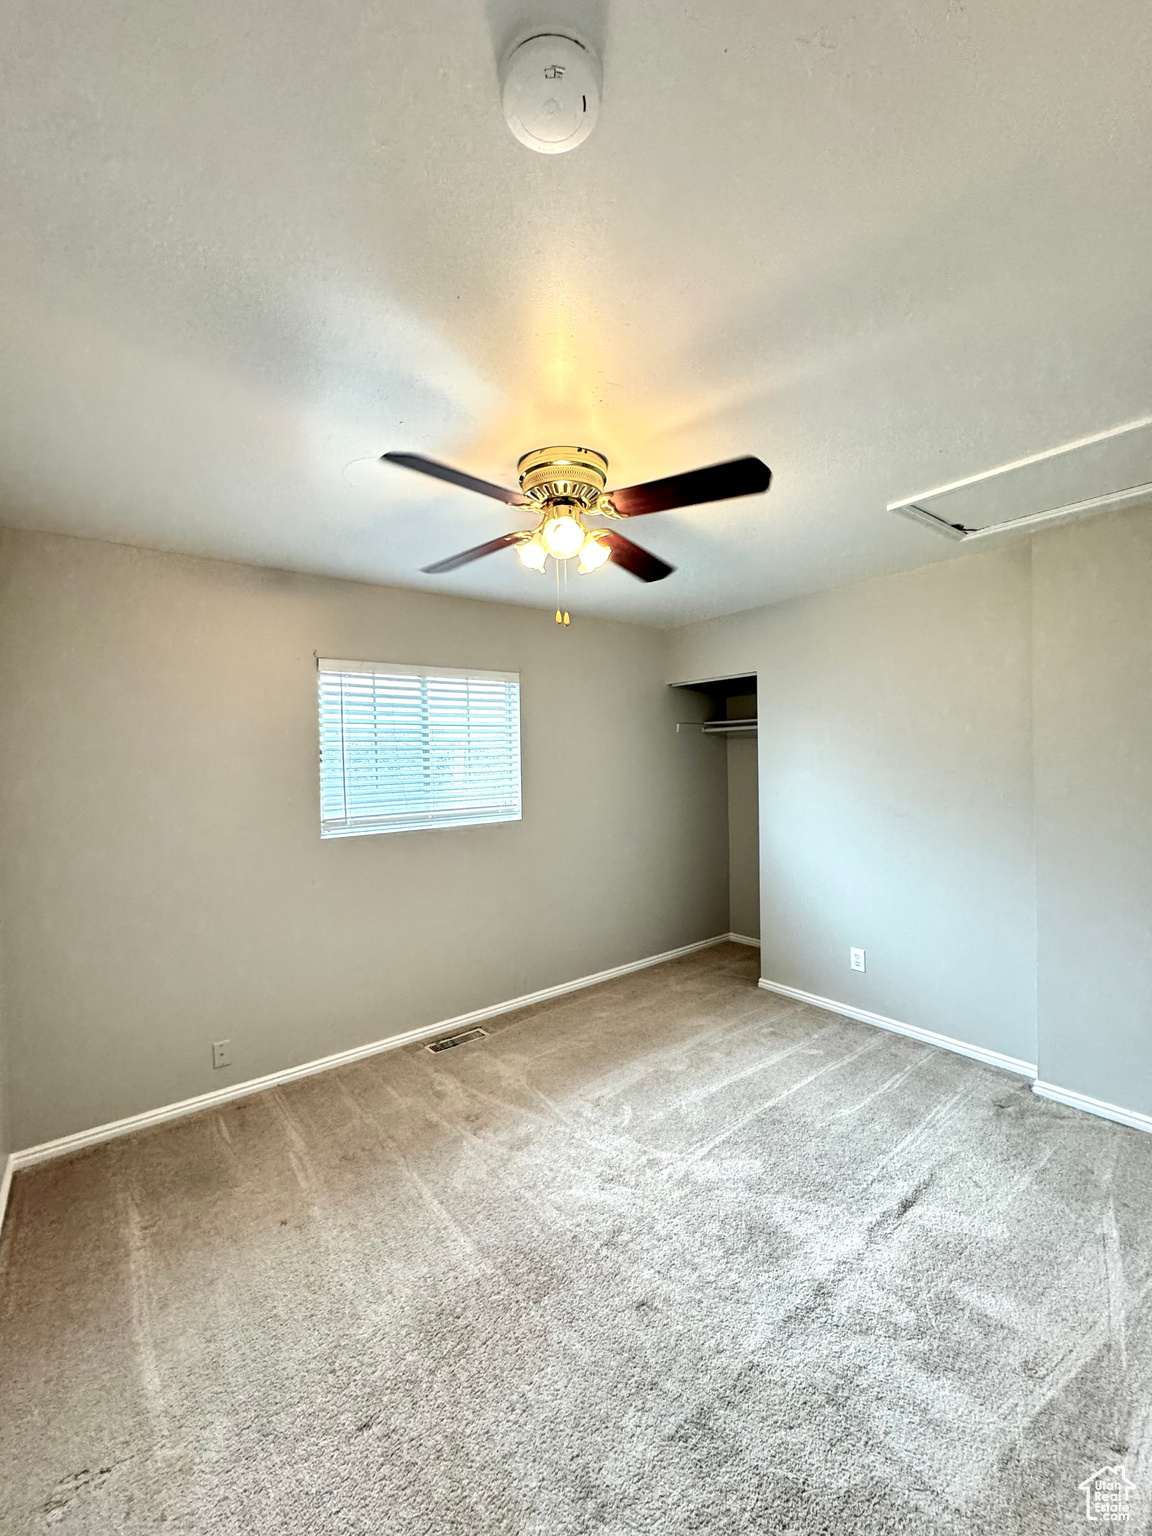 Carpeted bedroom room featuring carpet and ceiling fan